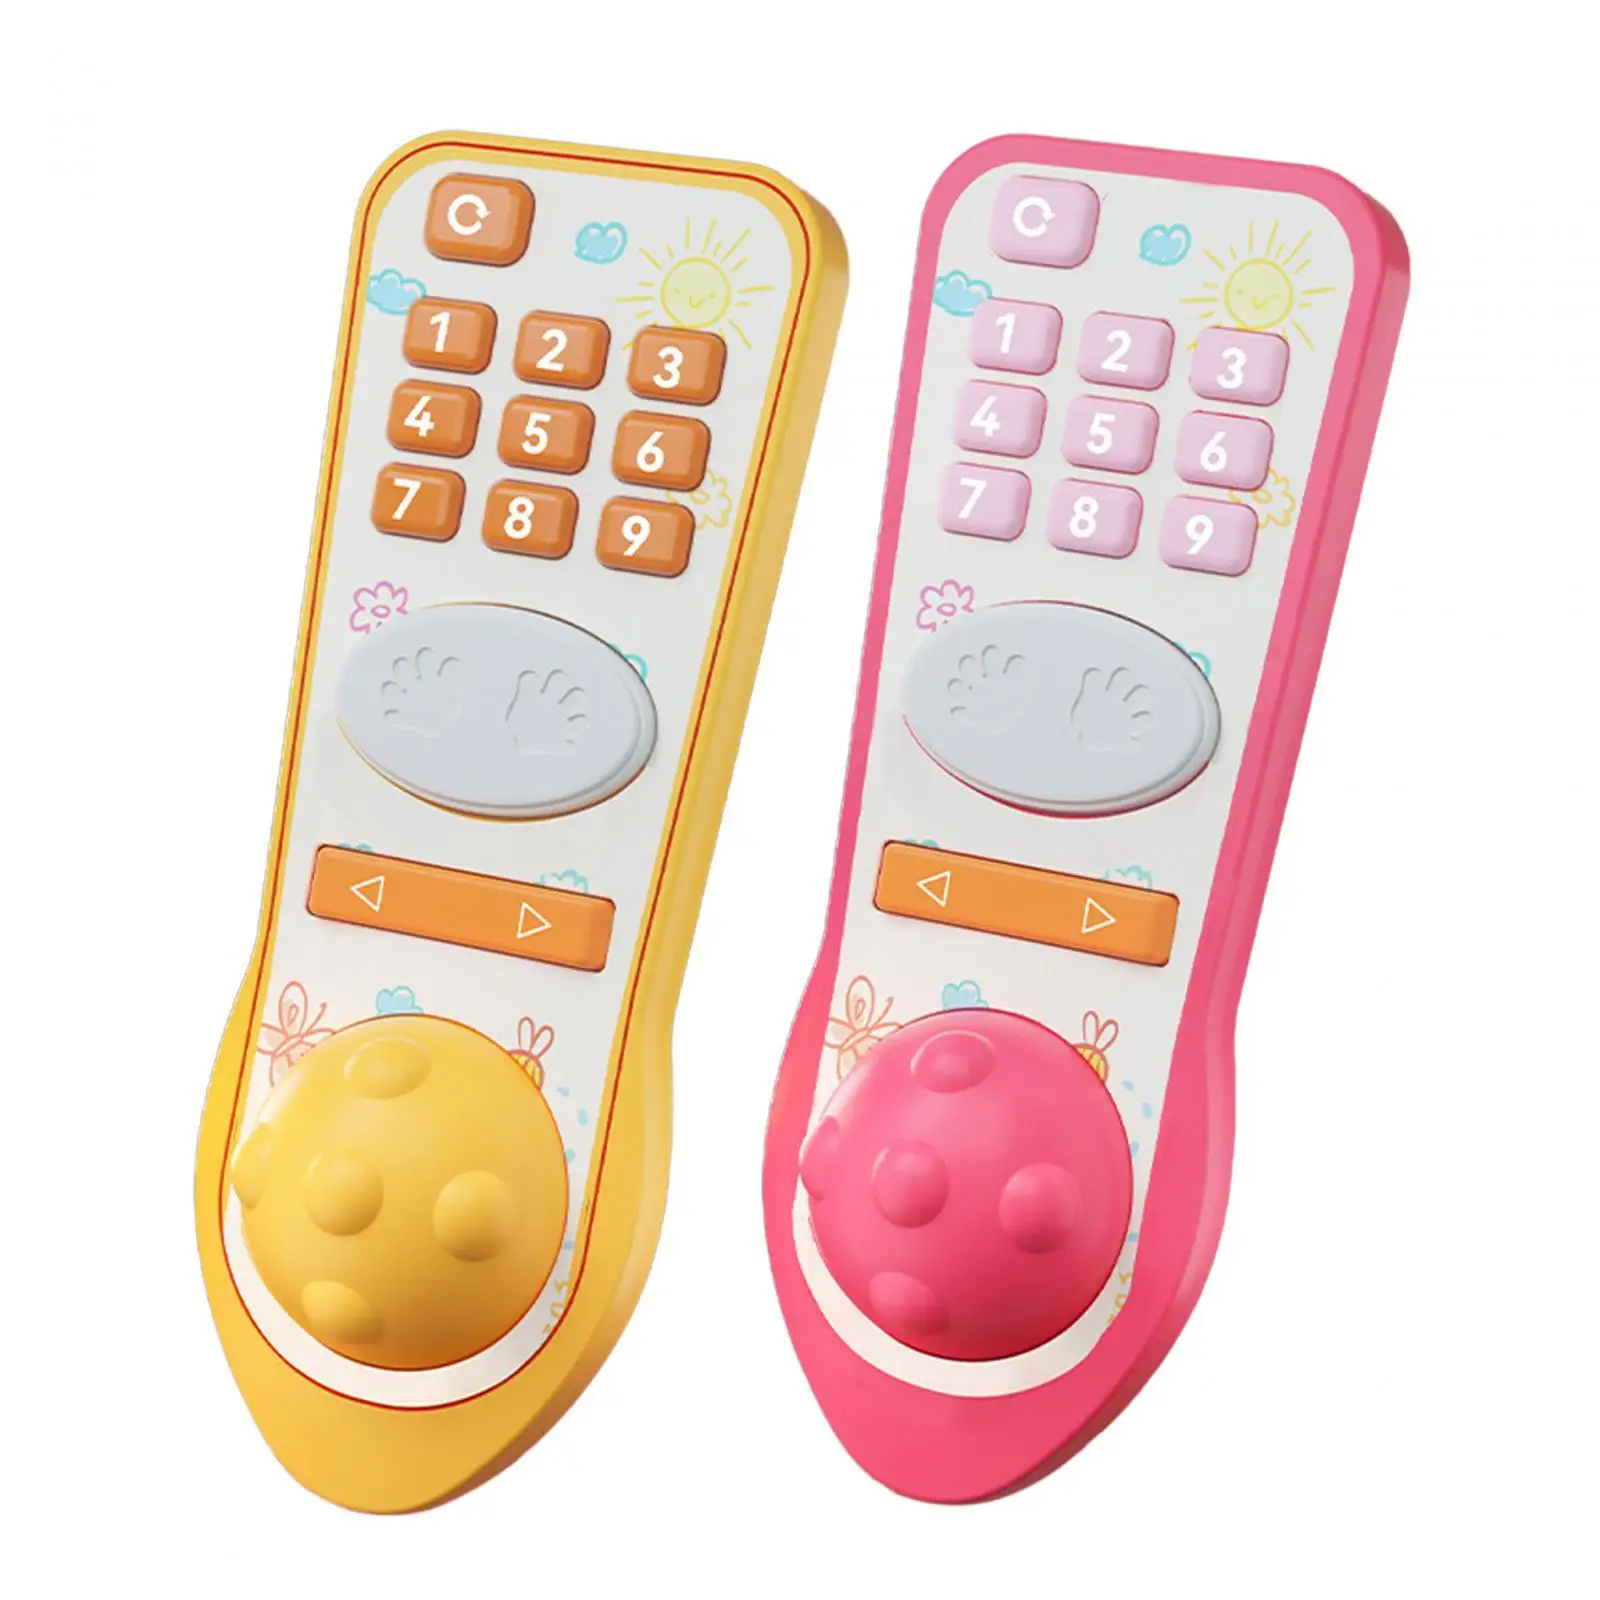 Musical TV Remote Control Toy Realistic Fun Learning Remote Toy Early Educational for 12 to 18 Months Baby Infants Boys Girls